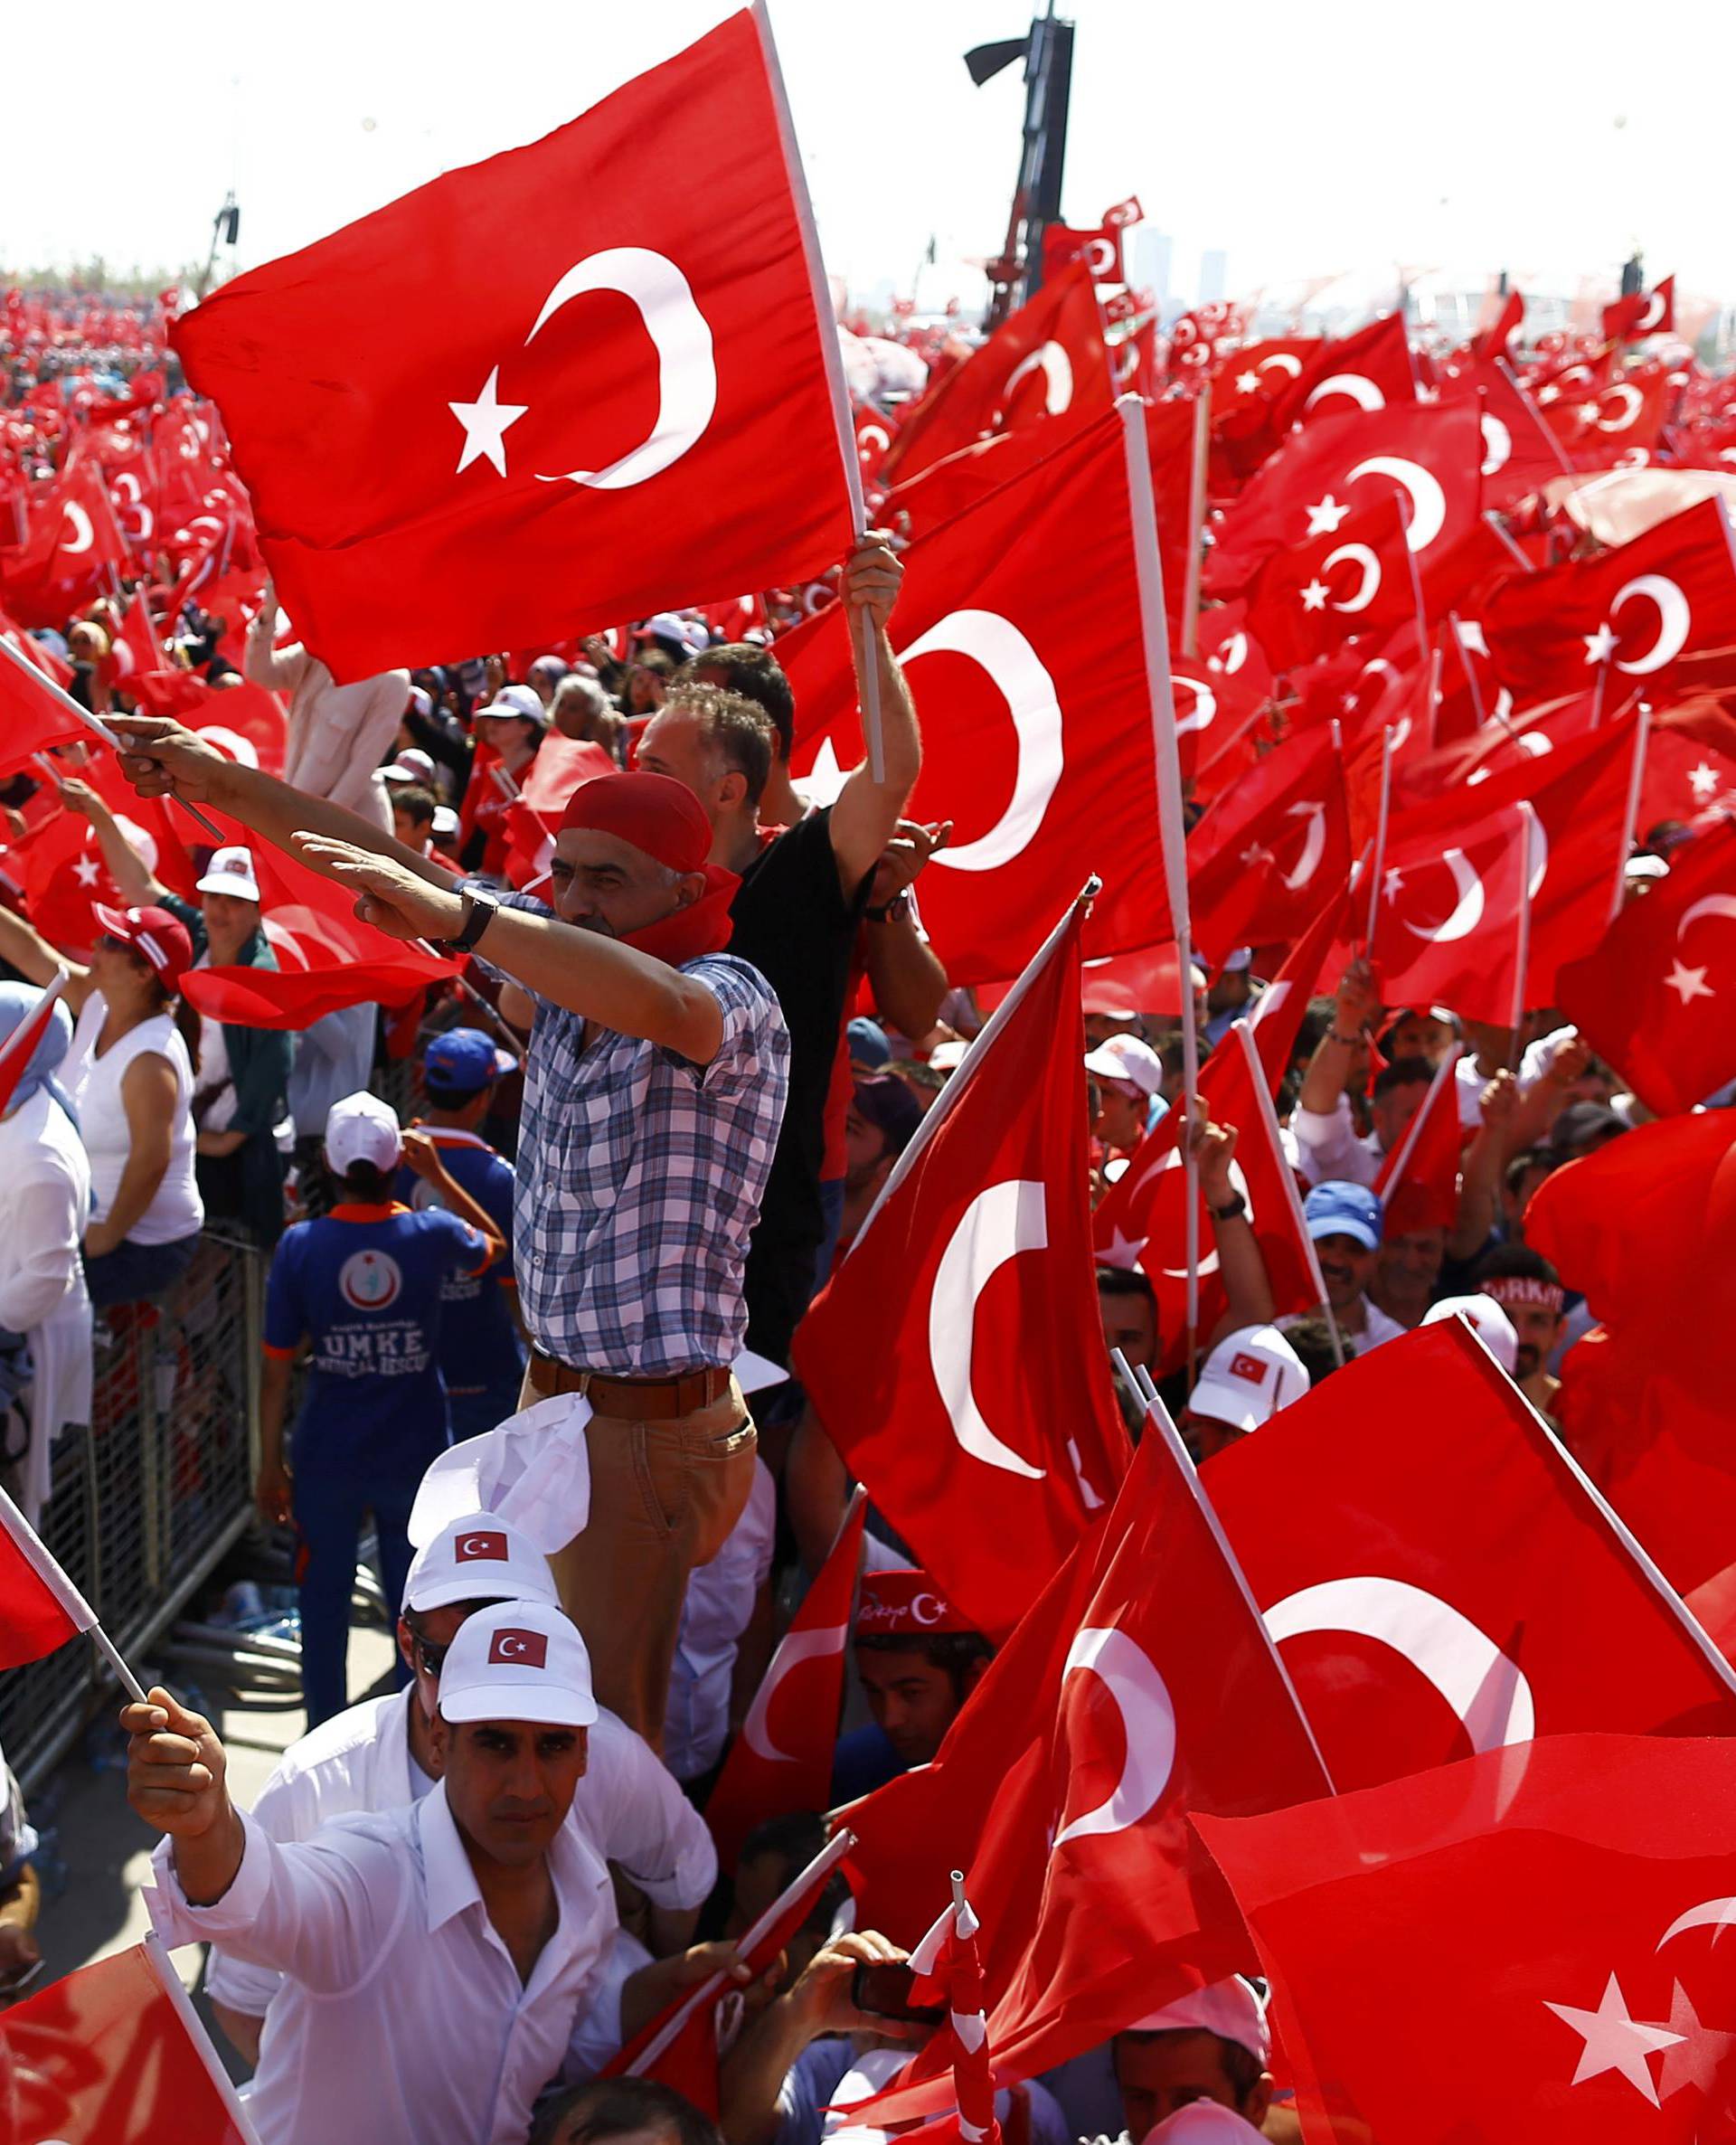 People wave Turkey's national flags during the Democracy and Martyrs Rally in Istanbul